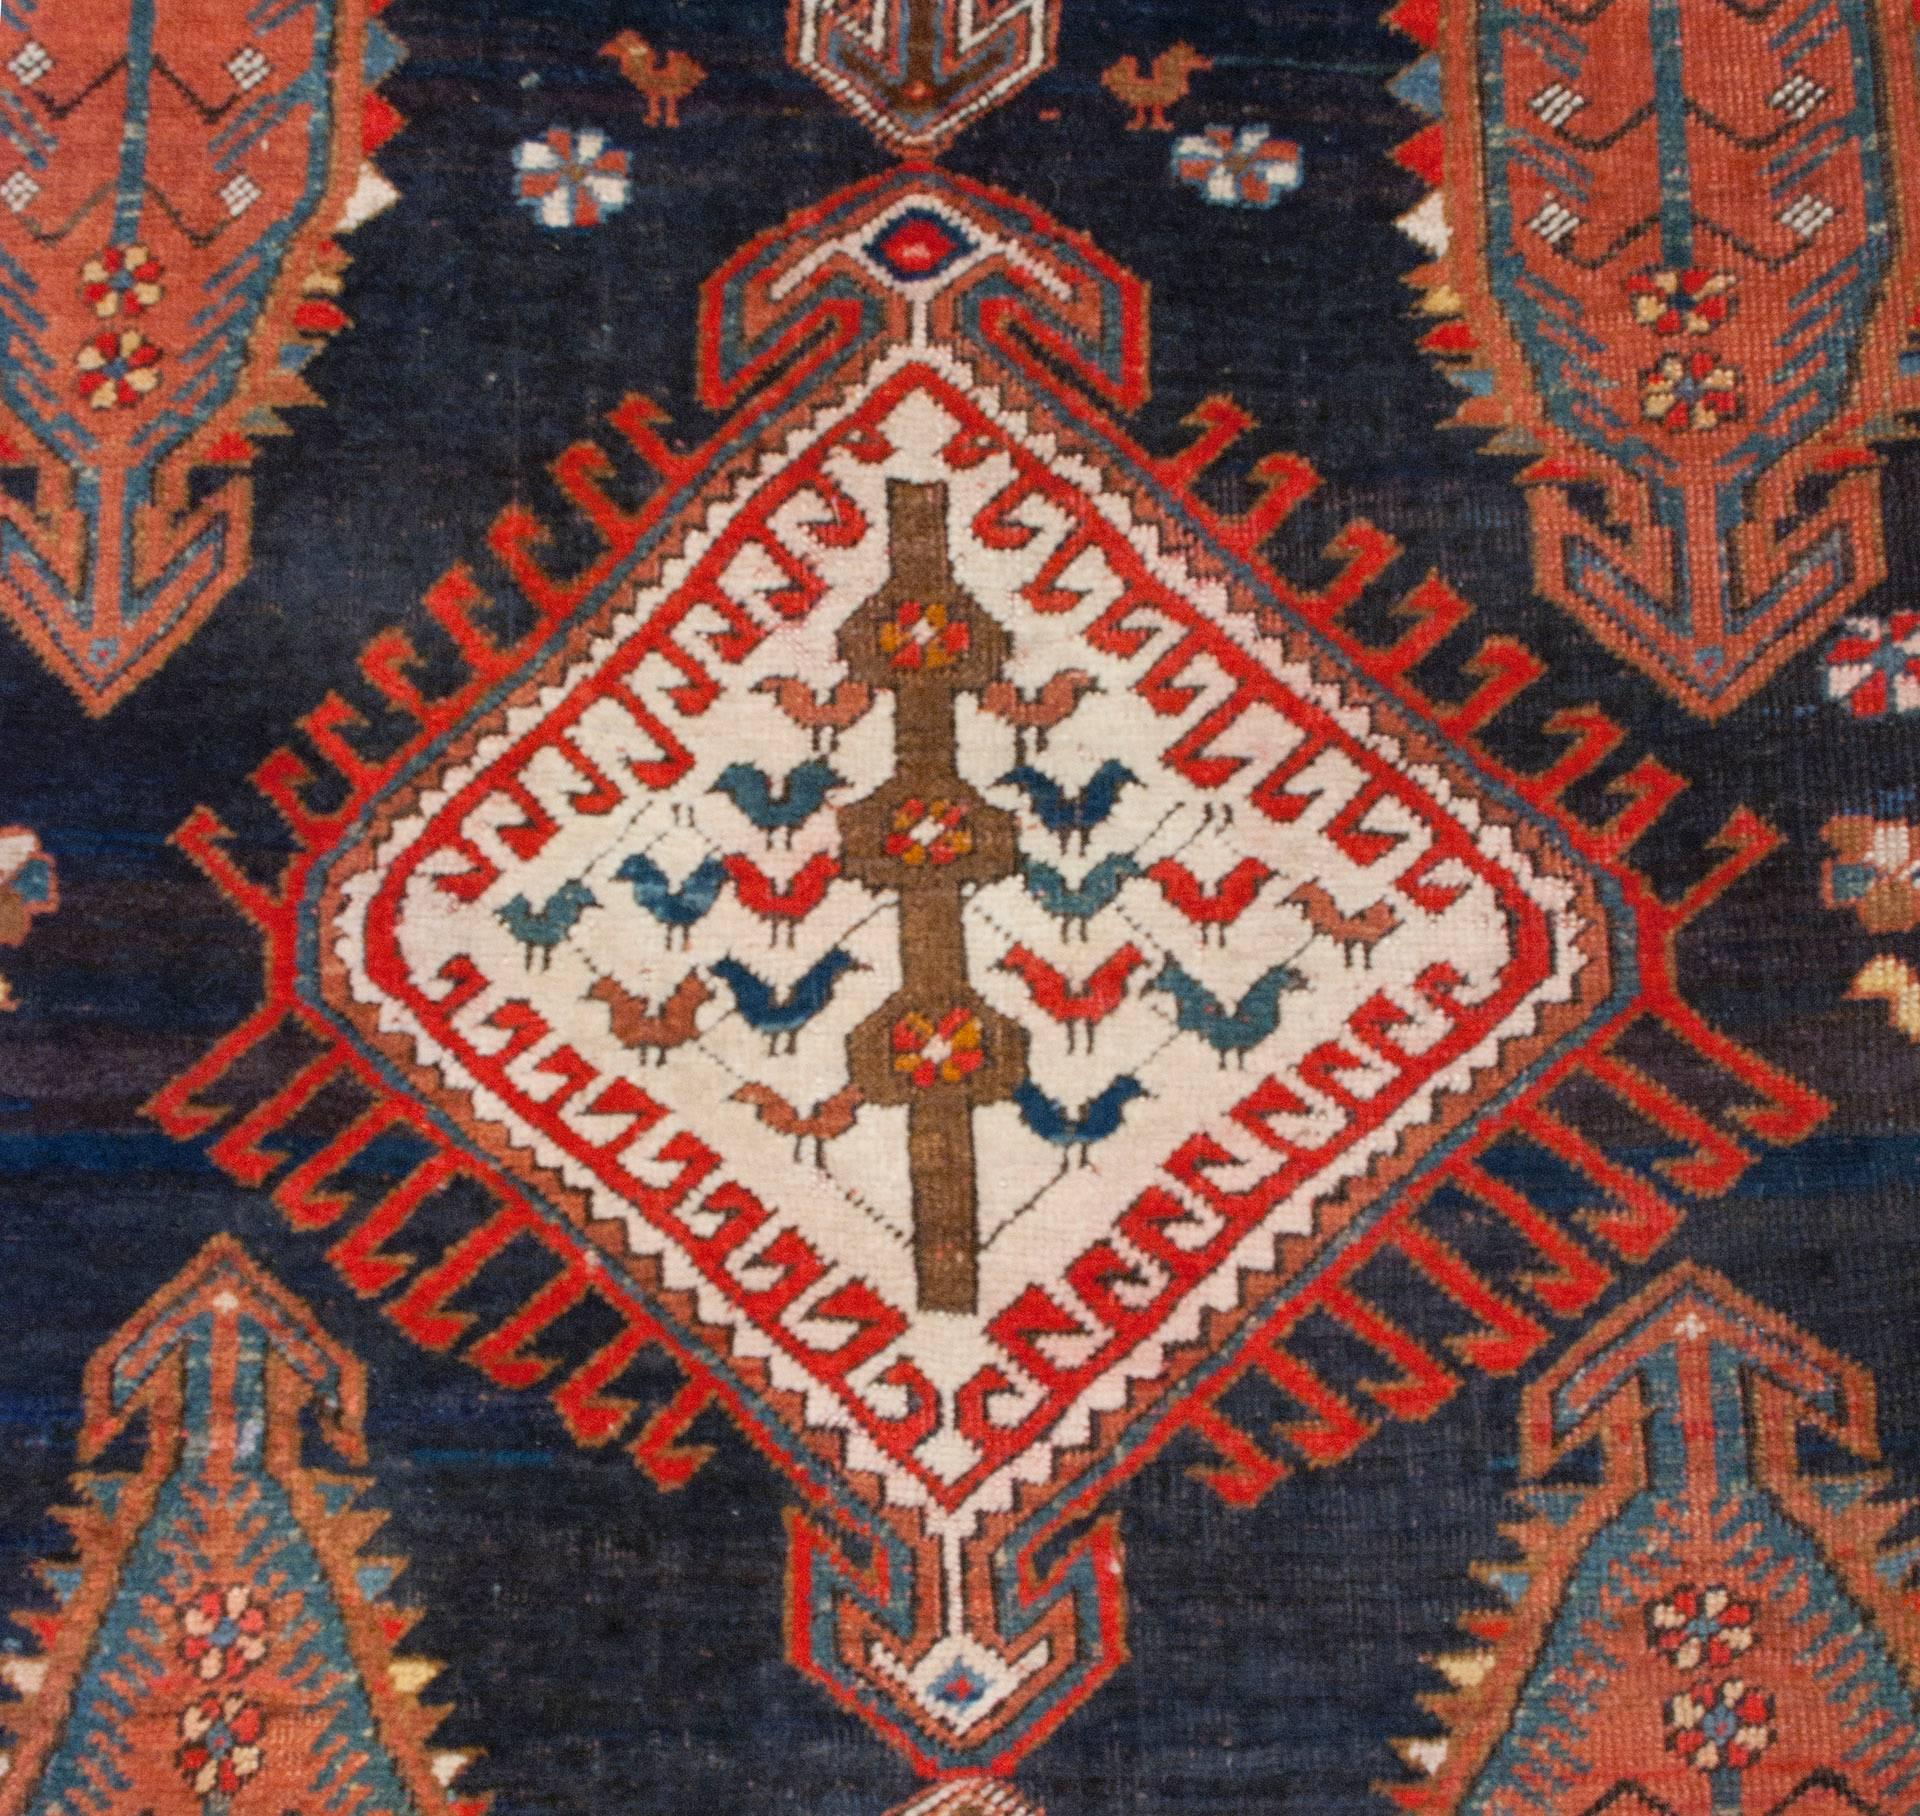 An early 20th century Persian Karabagh rug with a large central diamond medallion on an indigo background, amidst a field of large, unusual flowering tree-of-life motifs woven in crimson, natural wool, indigo and white. The rug is surrounded by a